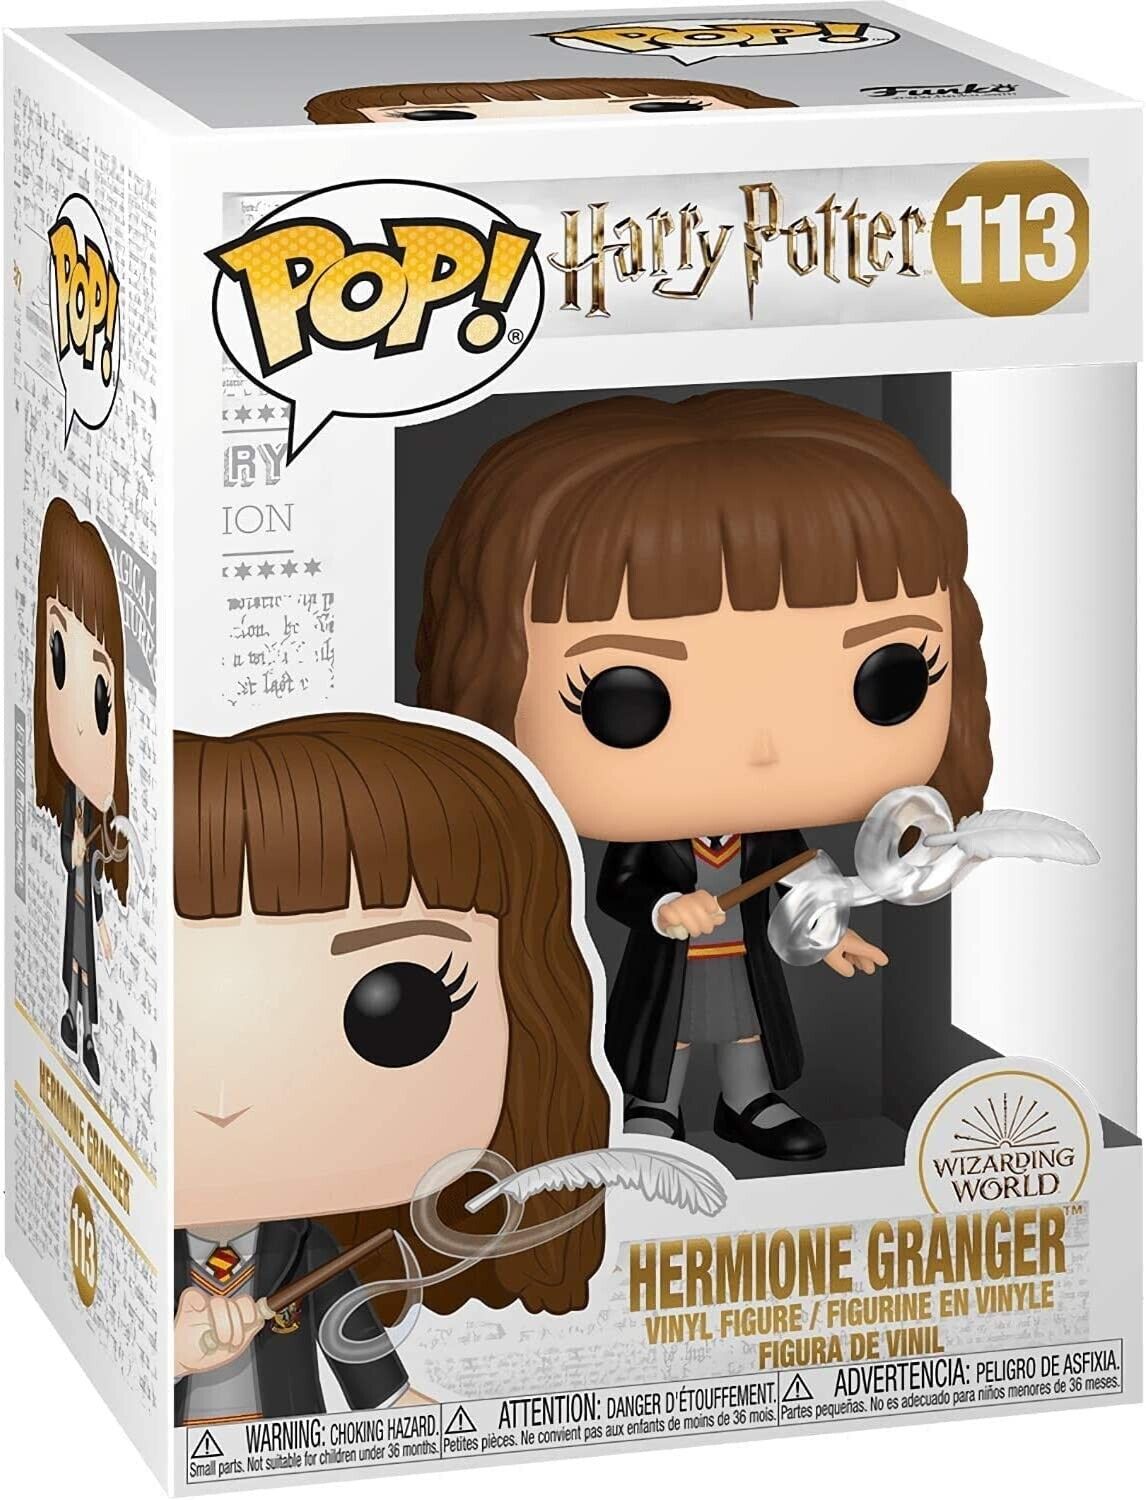 Funko Pop Harry Potter: Hermione Granger with Feather Vinyl Figure with case